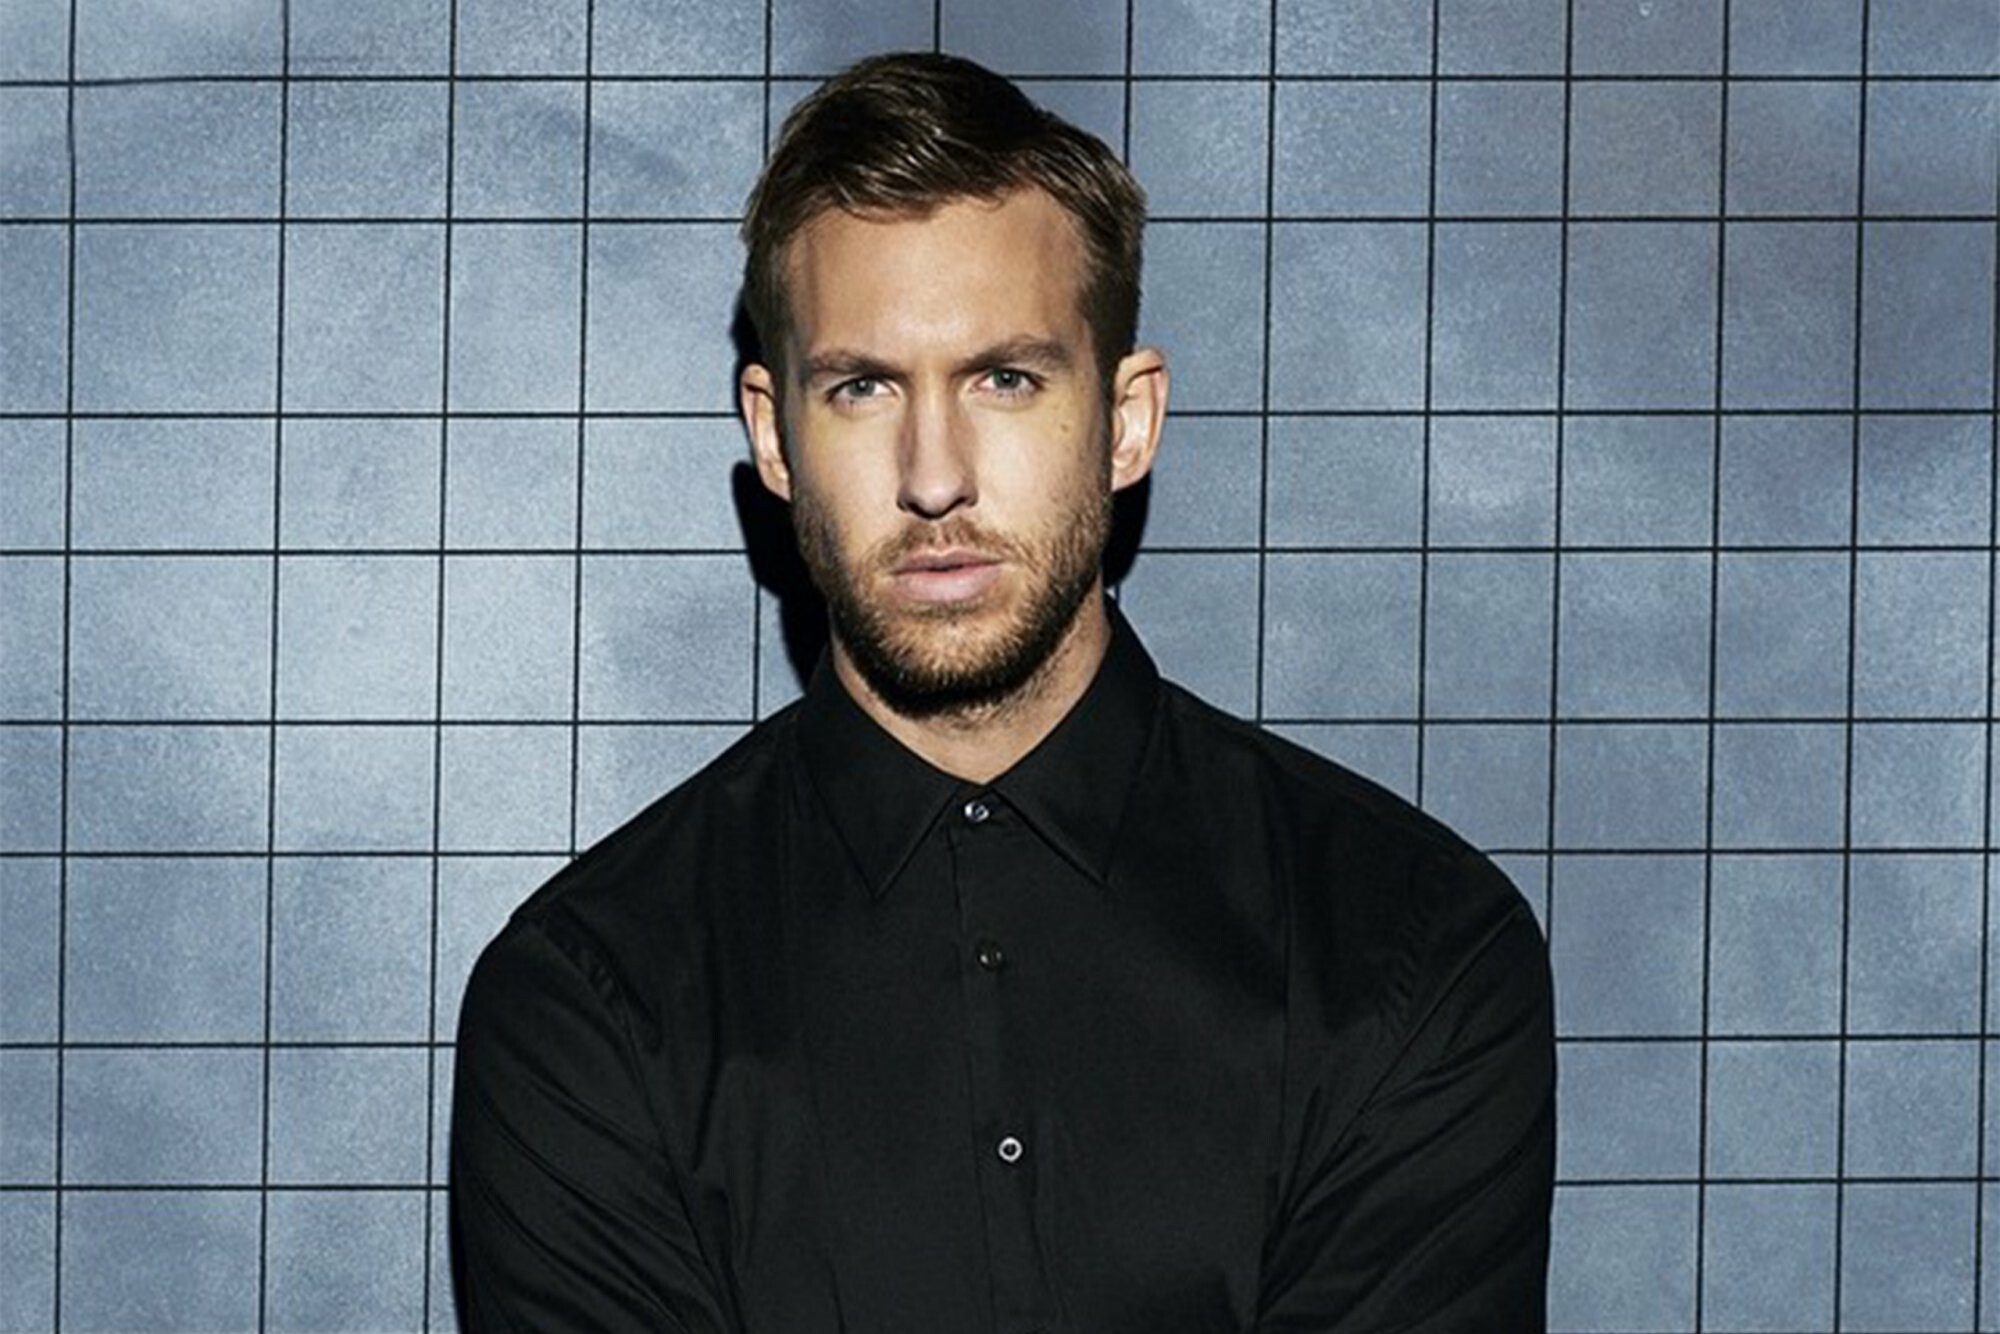 Calvin Harris: "I Need Your Love", featuring vocals from English singer Ellie Goulding, was released on 2 April 2013. 2000x1340 HD Wallpaper.